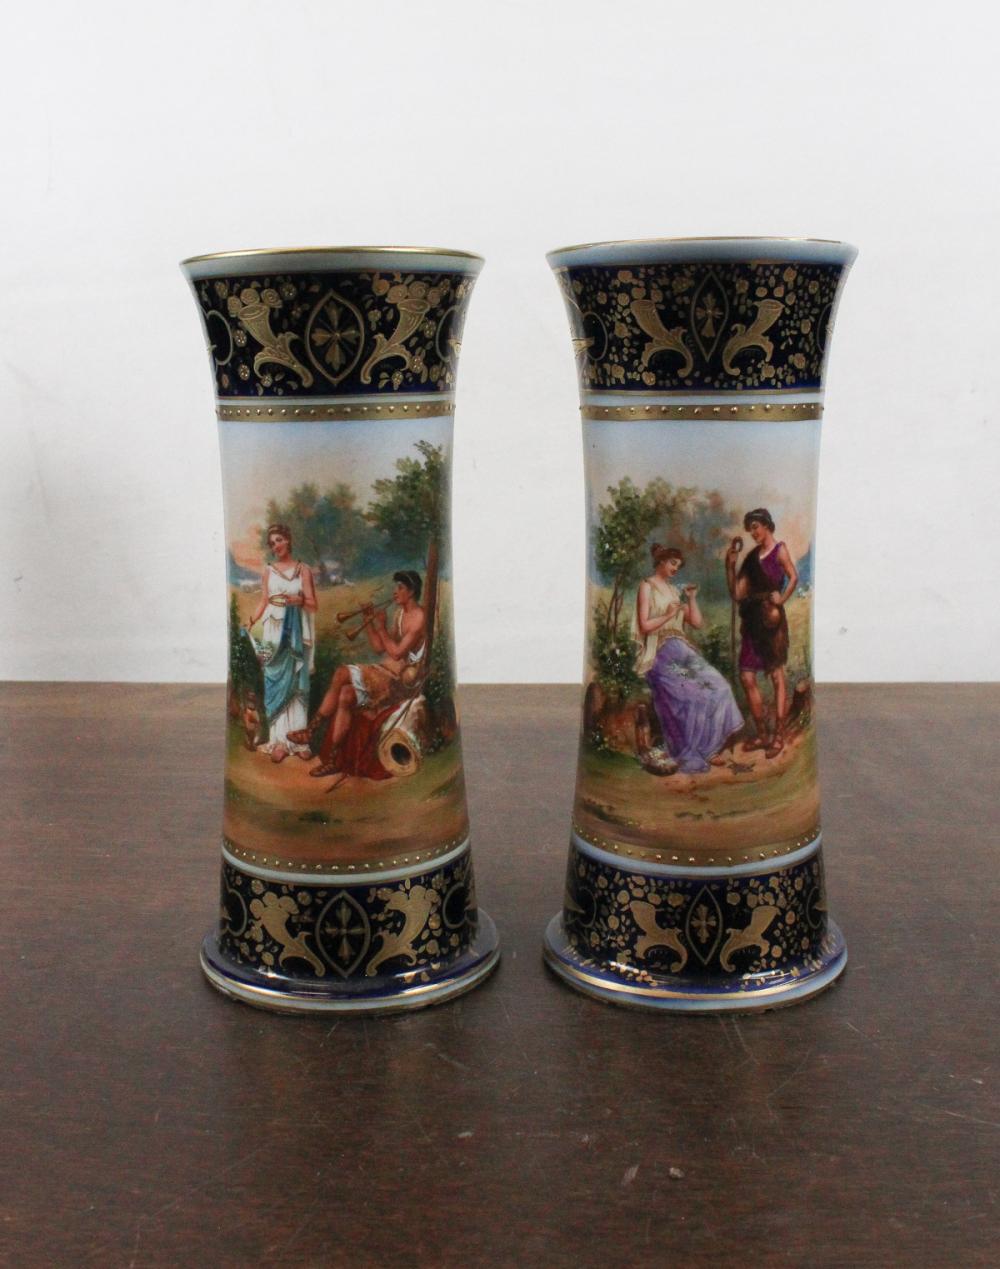 PAIR OF ROYAL VIENNA STYLE PORCELAIN